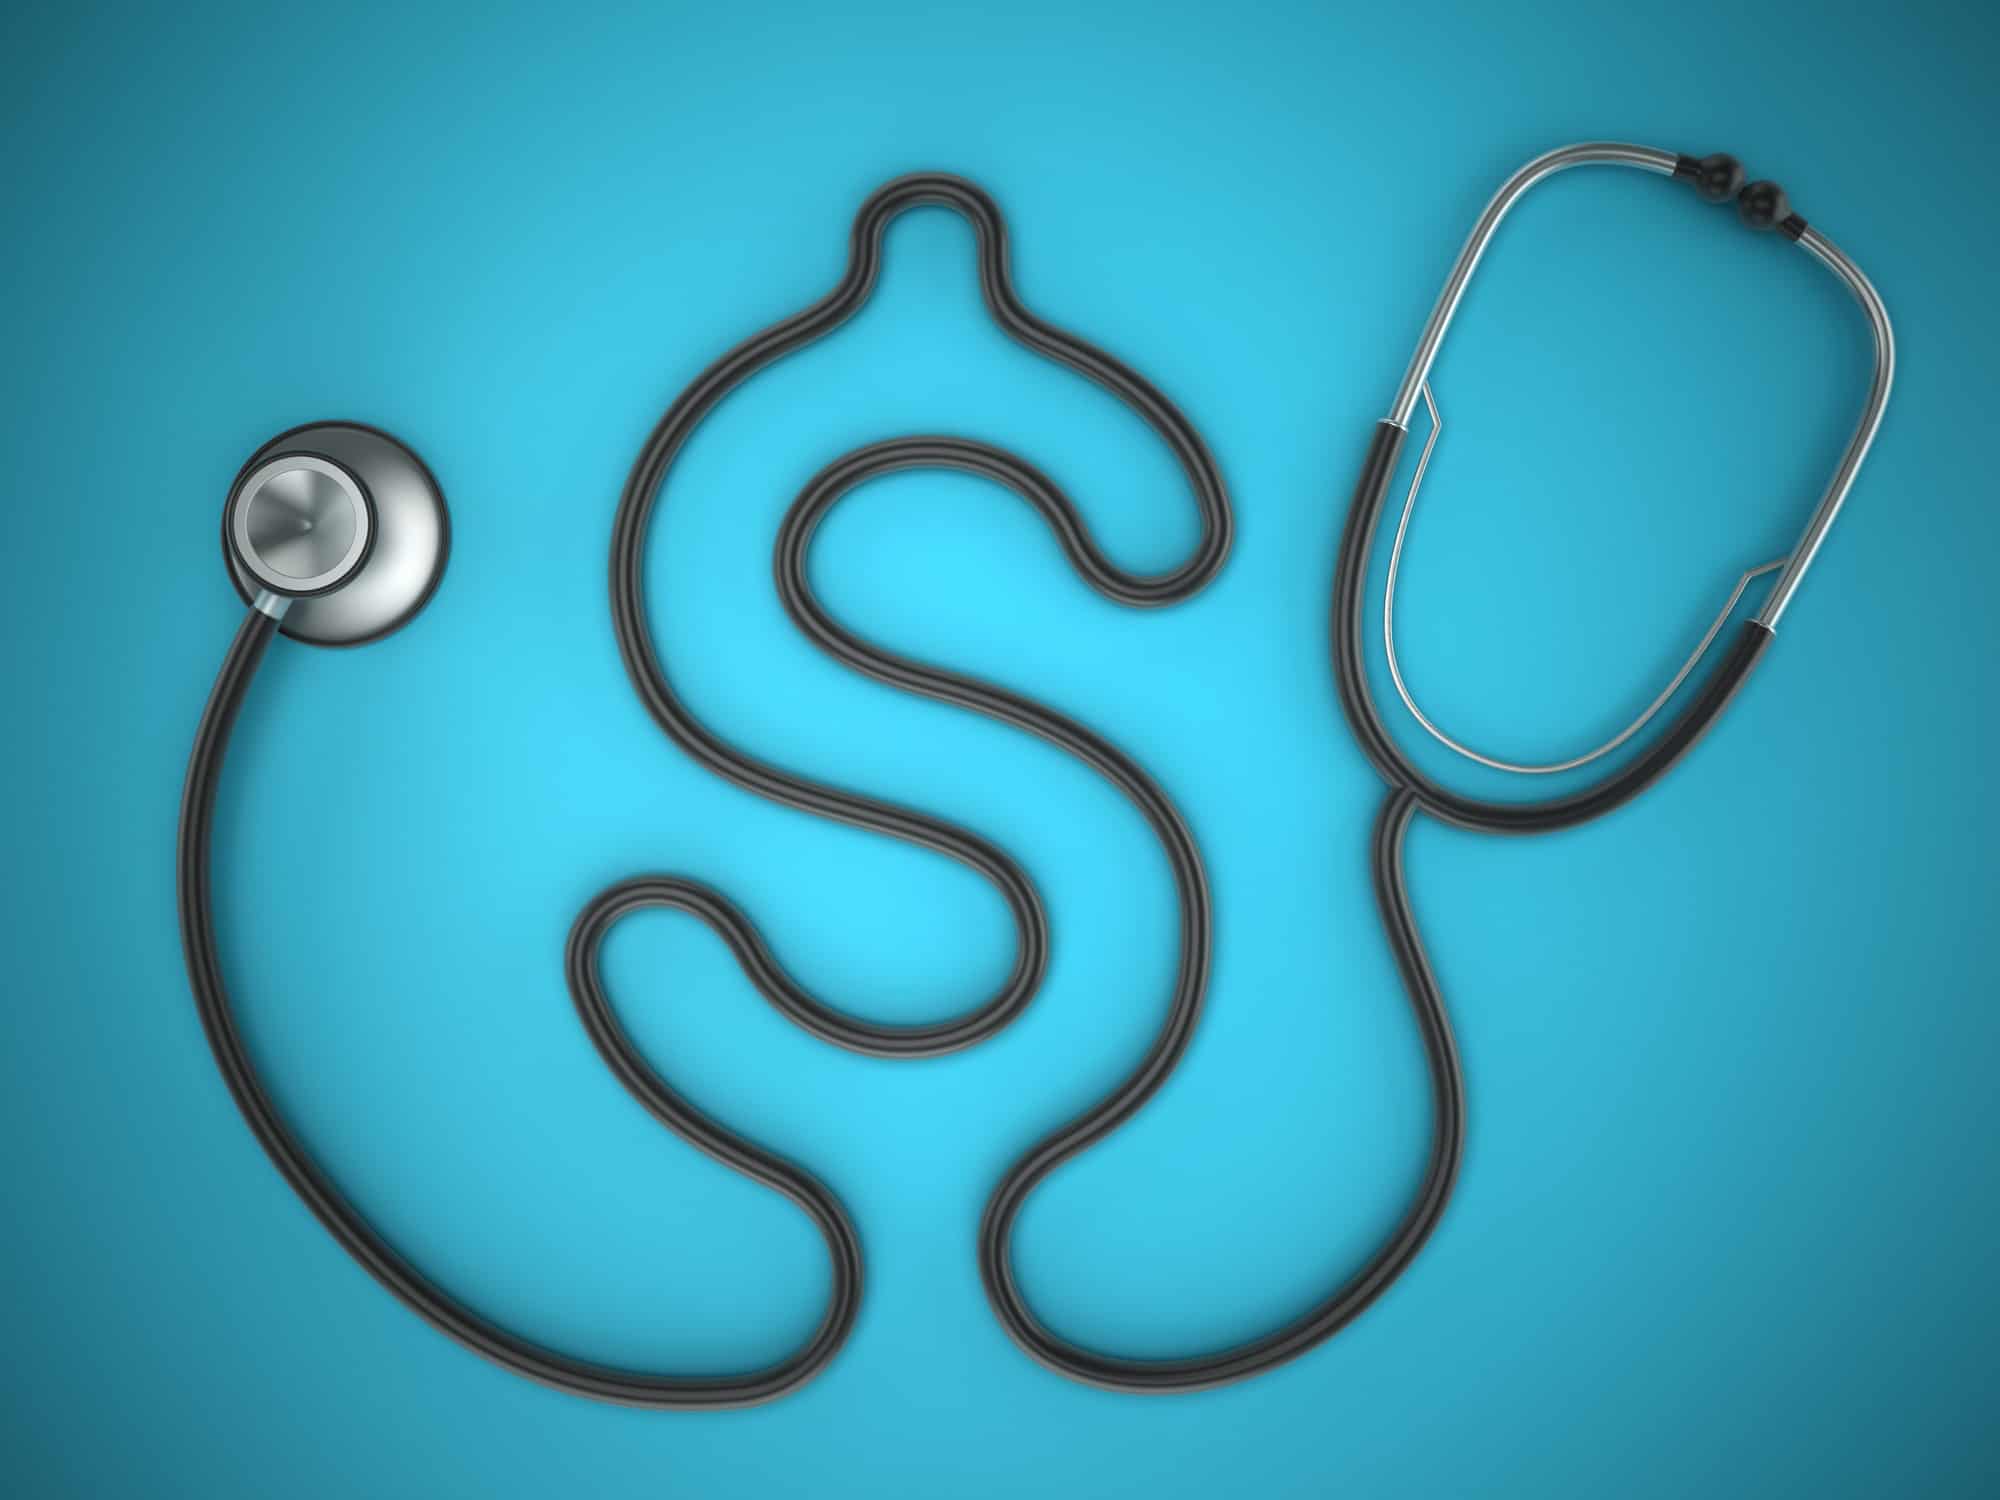 stethoscope twisted into a dollar sign